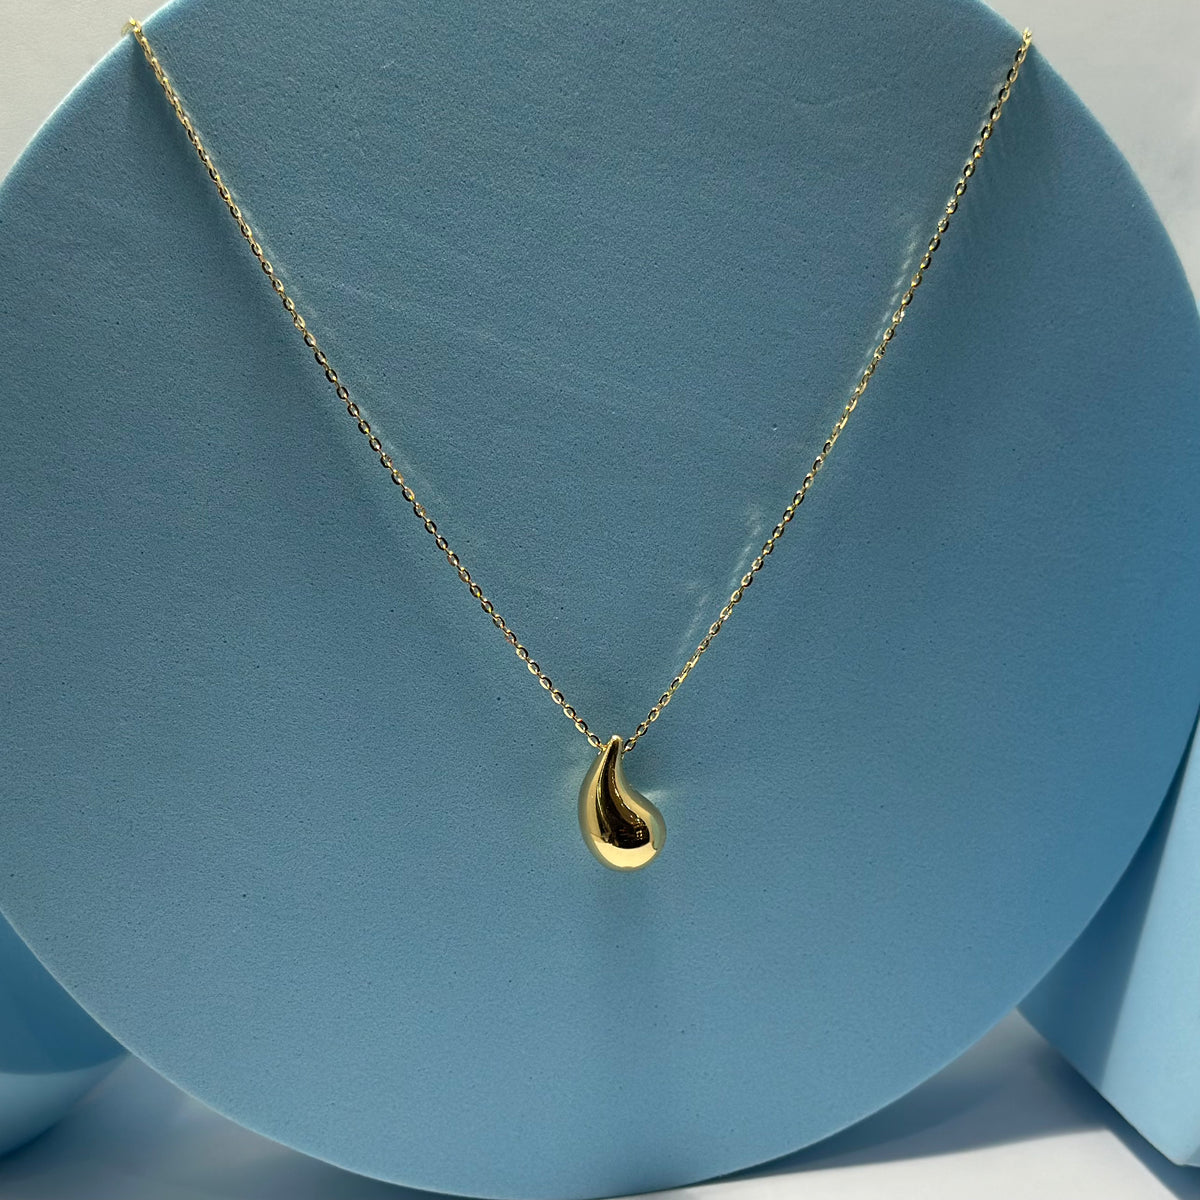 Real 18K Yellow Gold - Chunky Teardrop Small Necklace